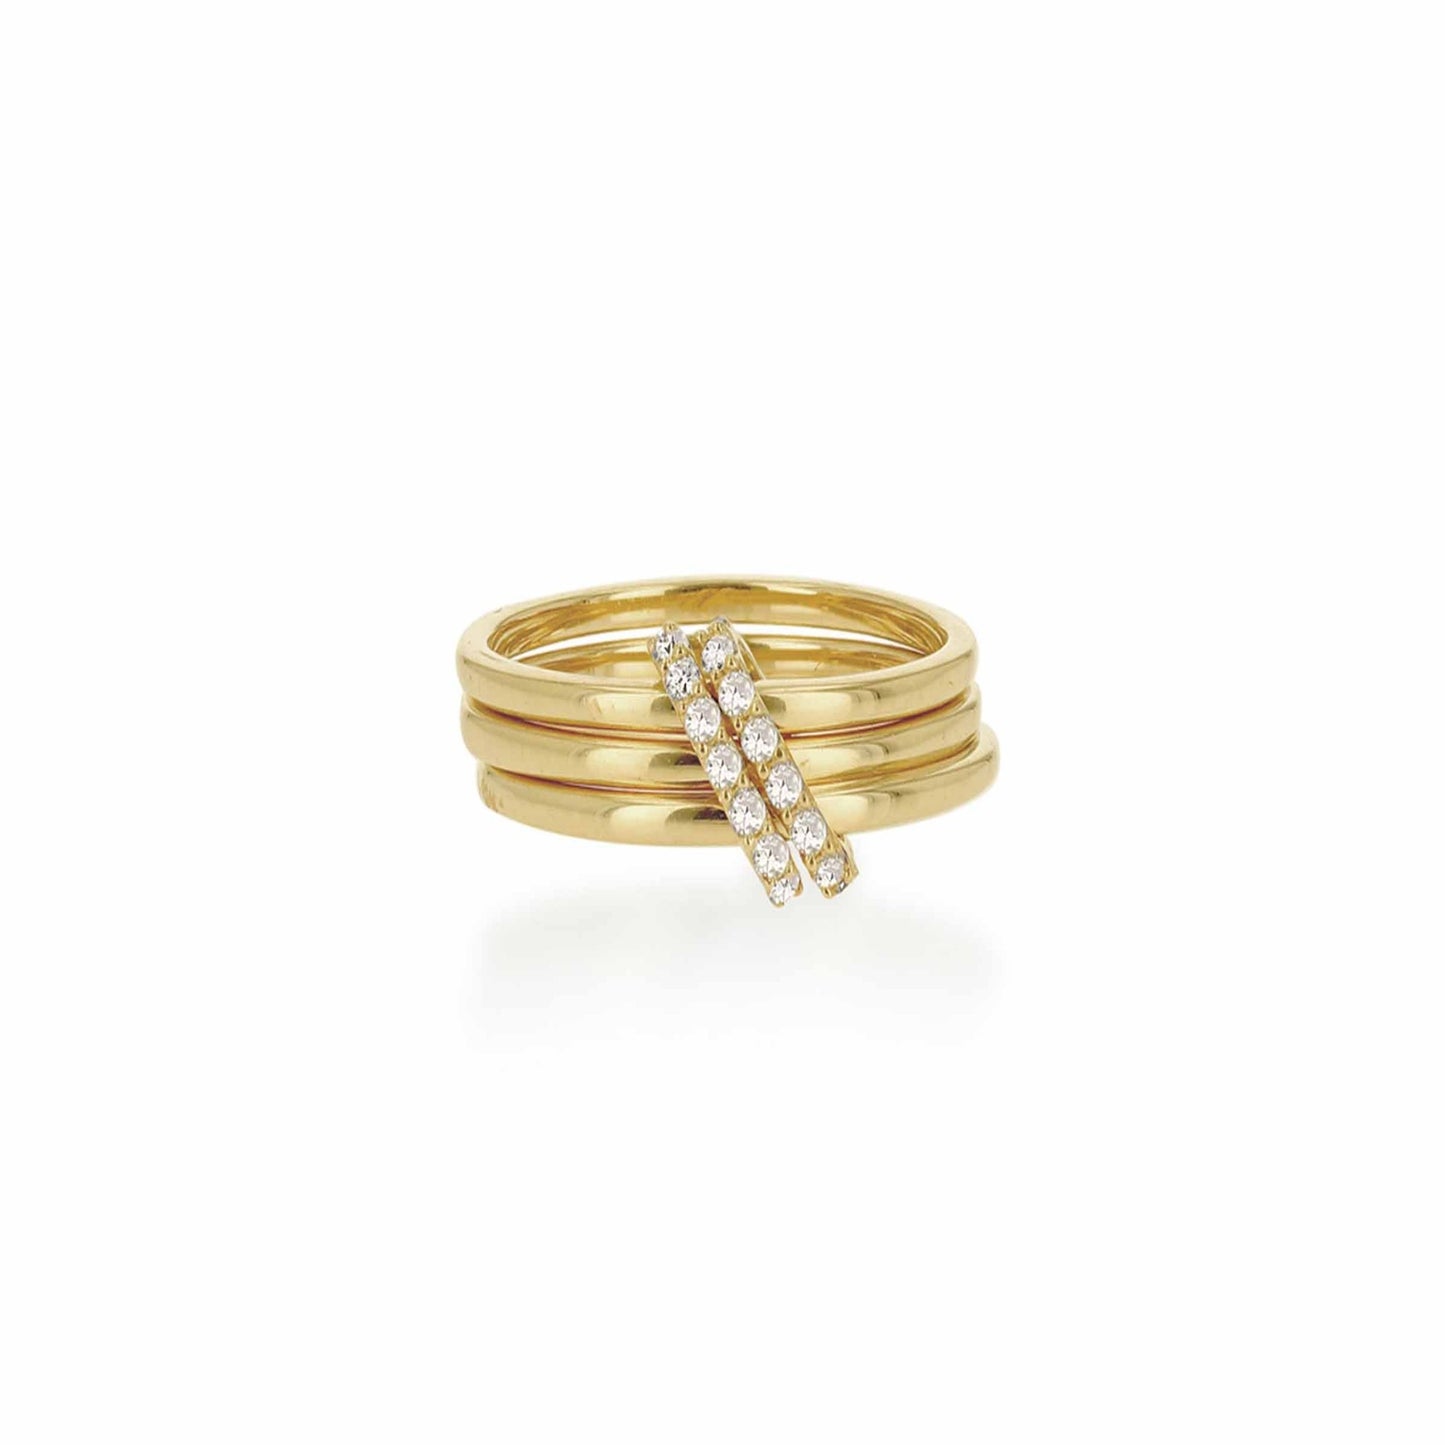 14k yellow gold band with diamond connectors